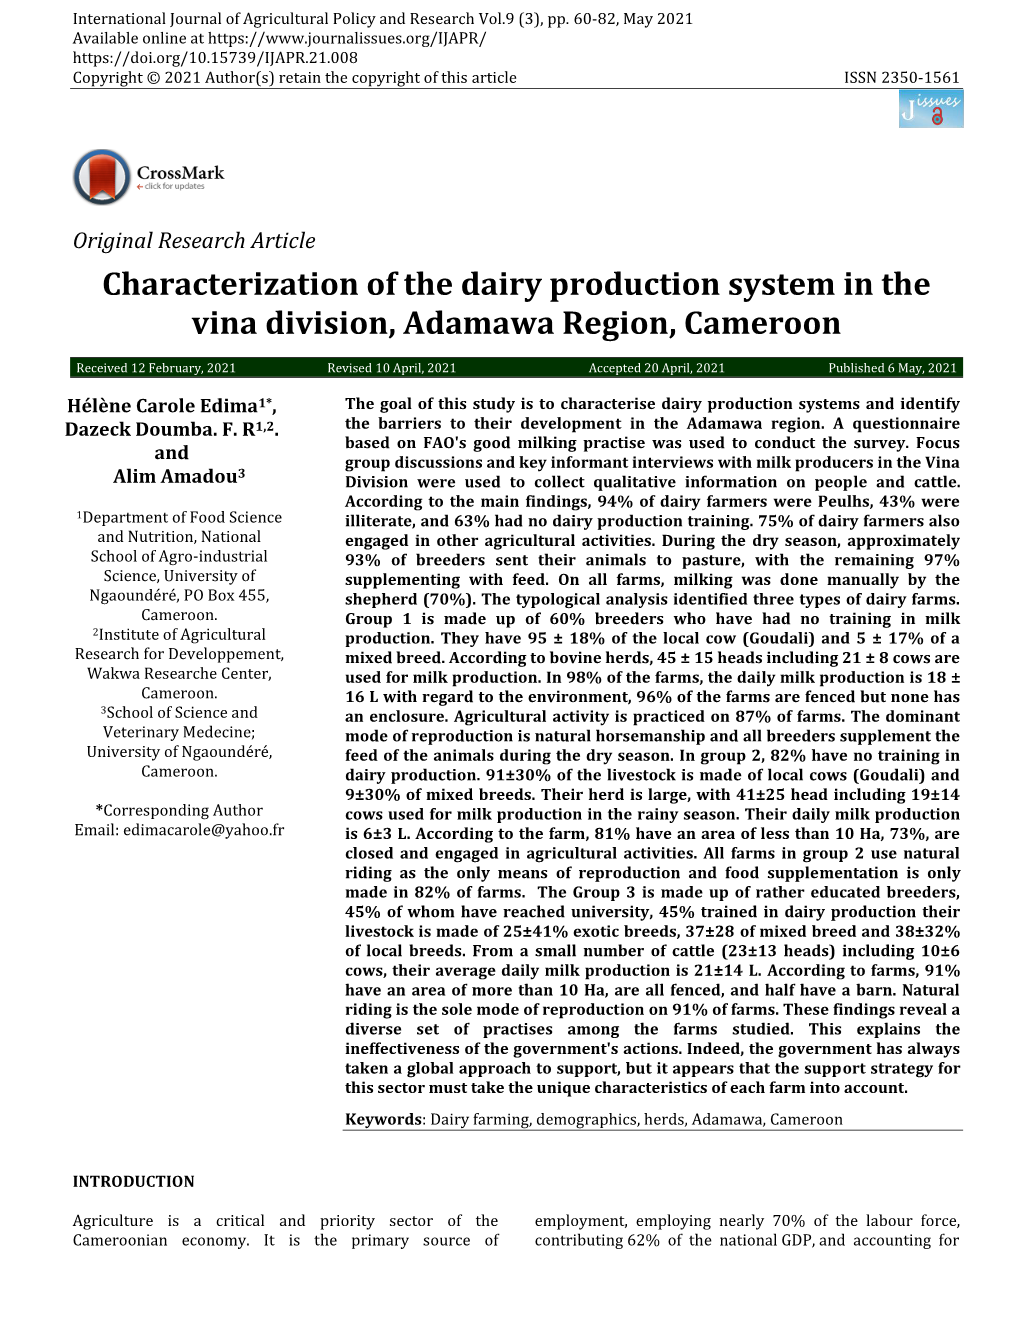 Characterization of the Dairy Production System in the Vina Division, Adamawa Region, Cameroon